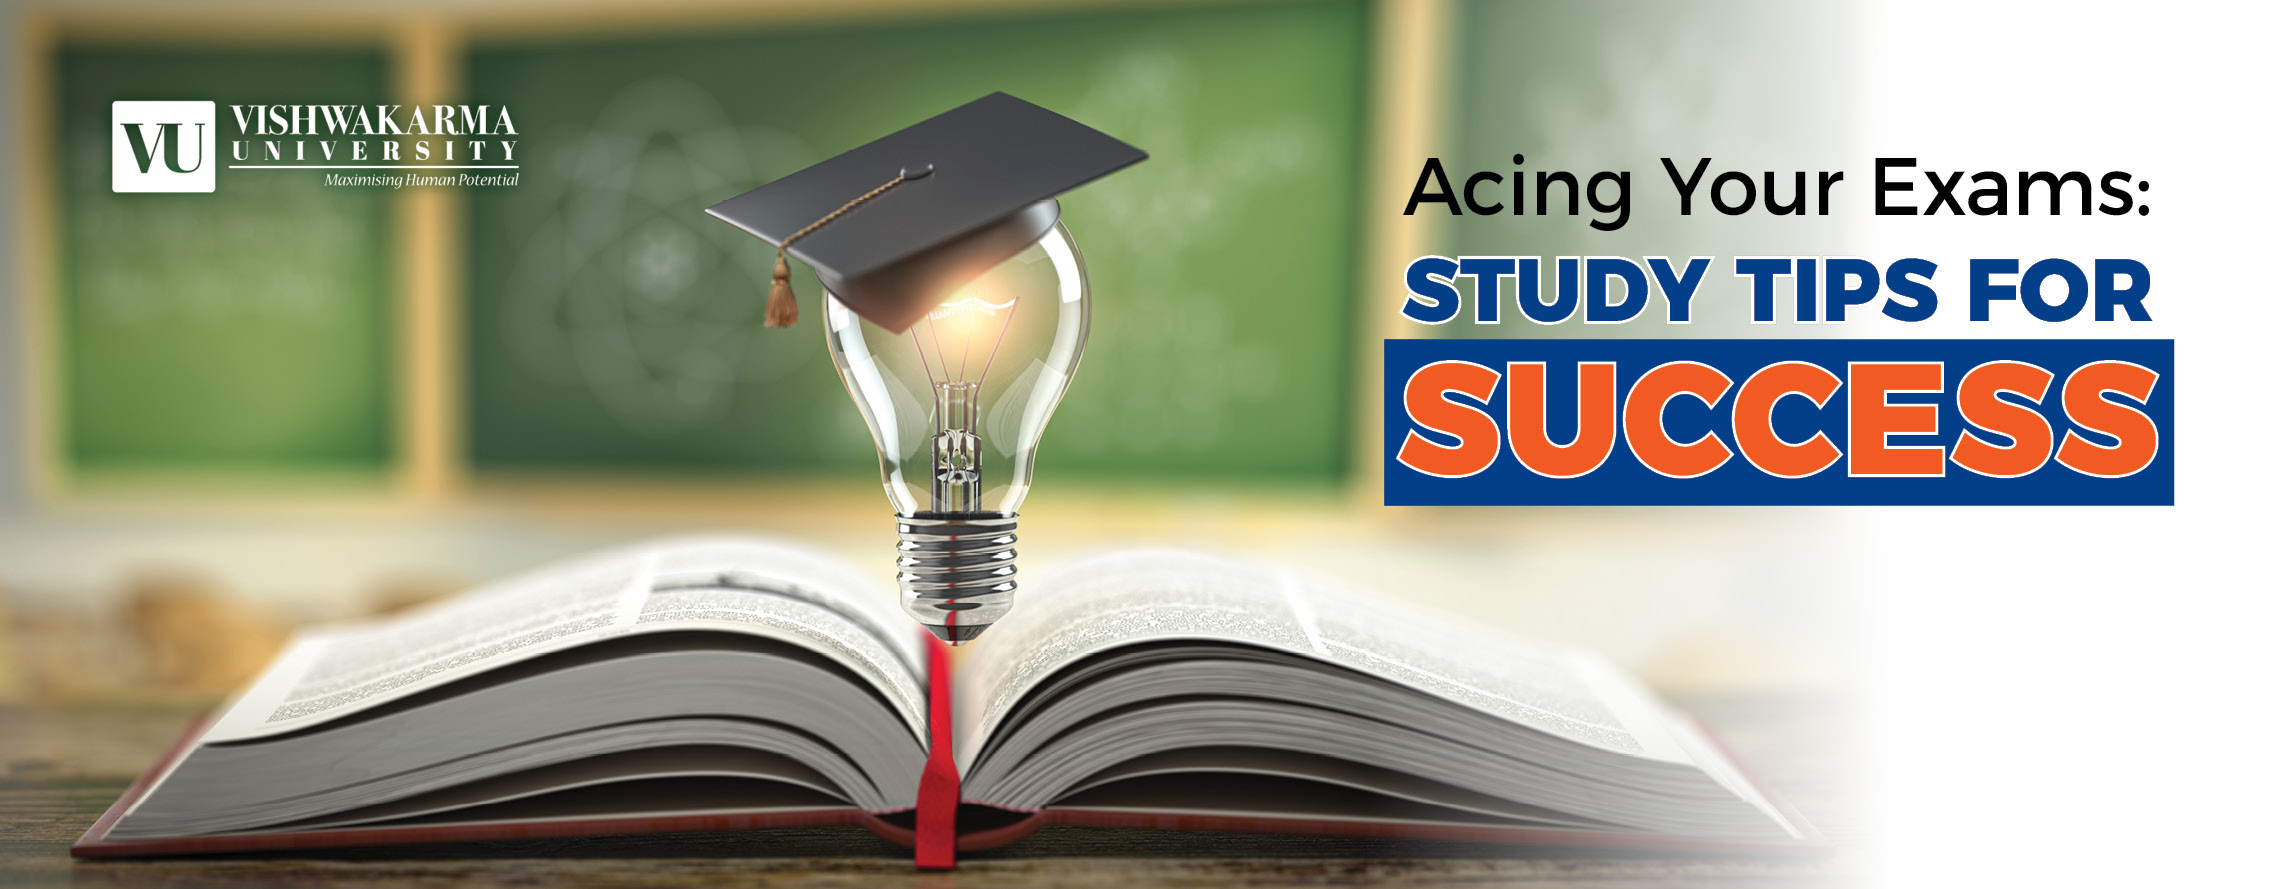 Acing Your Exams: Study Tips For Success